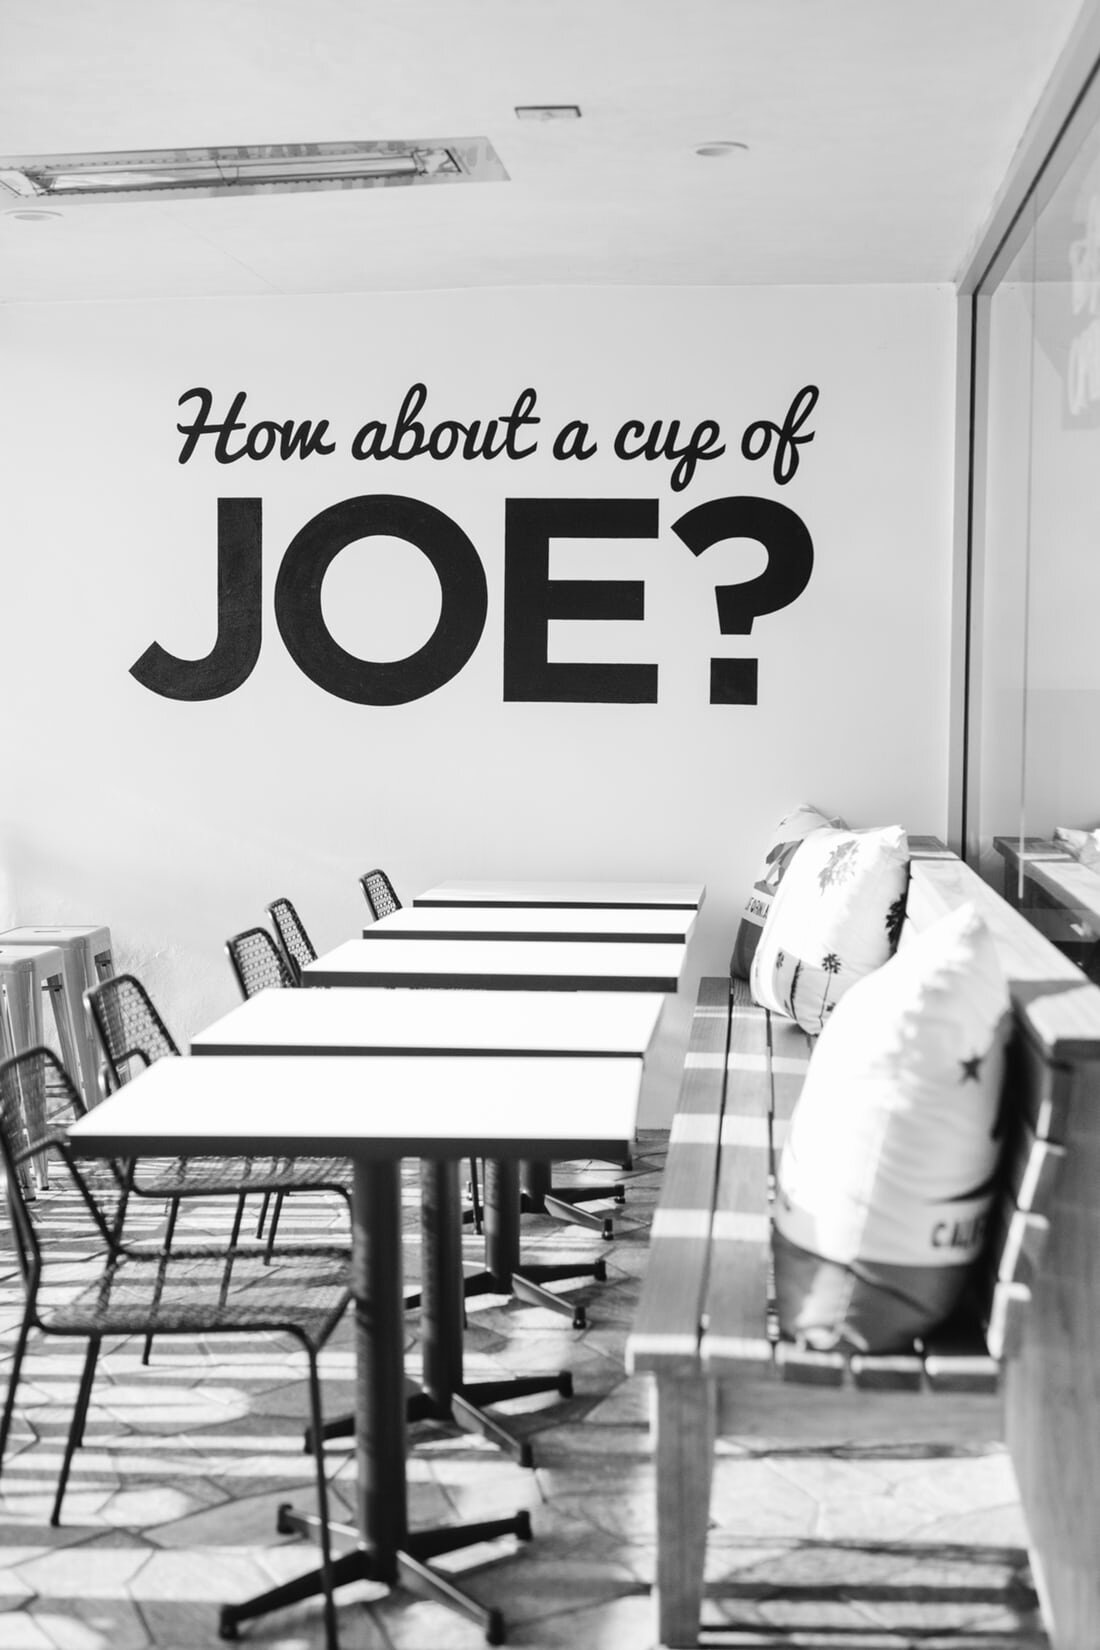 An empty coffee shop with the words “how about a cup of joe?” painted on the walls